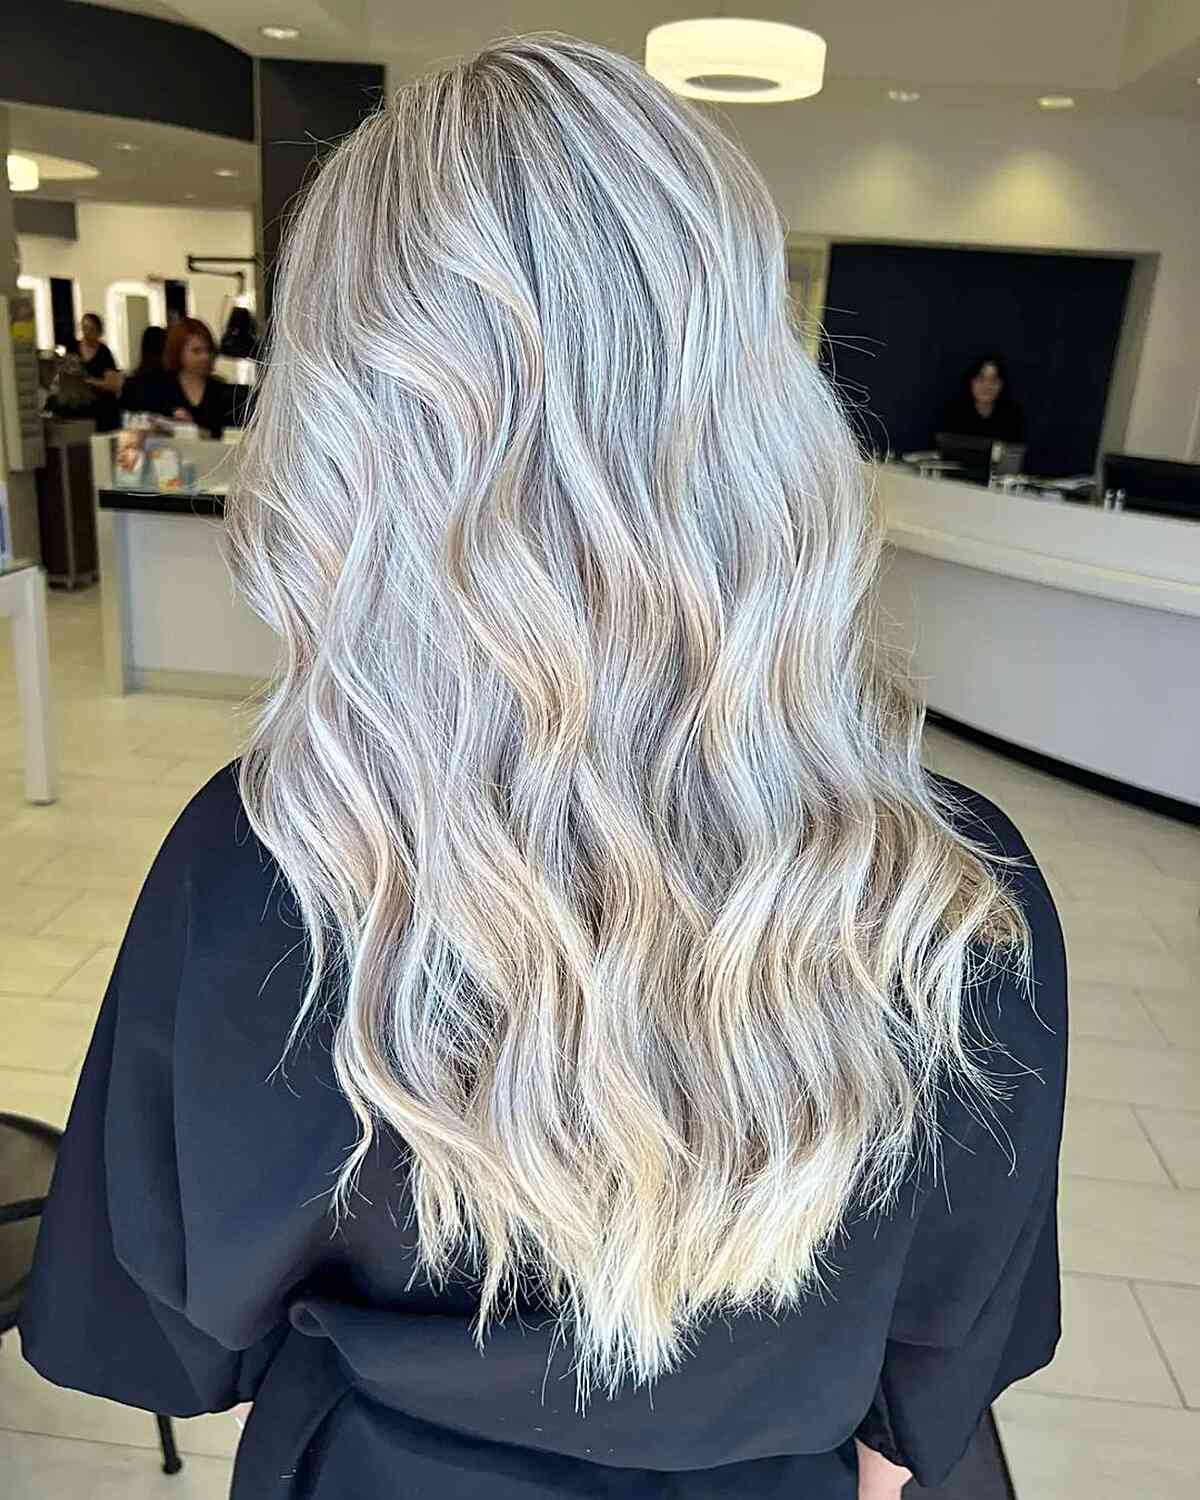 Icy Blonde Hair Color with Lowlights